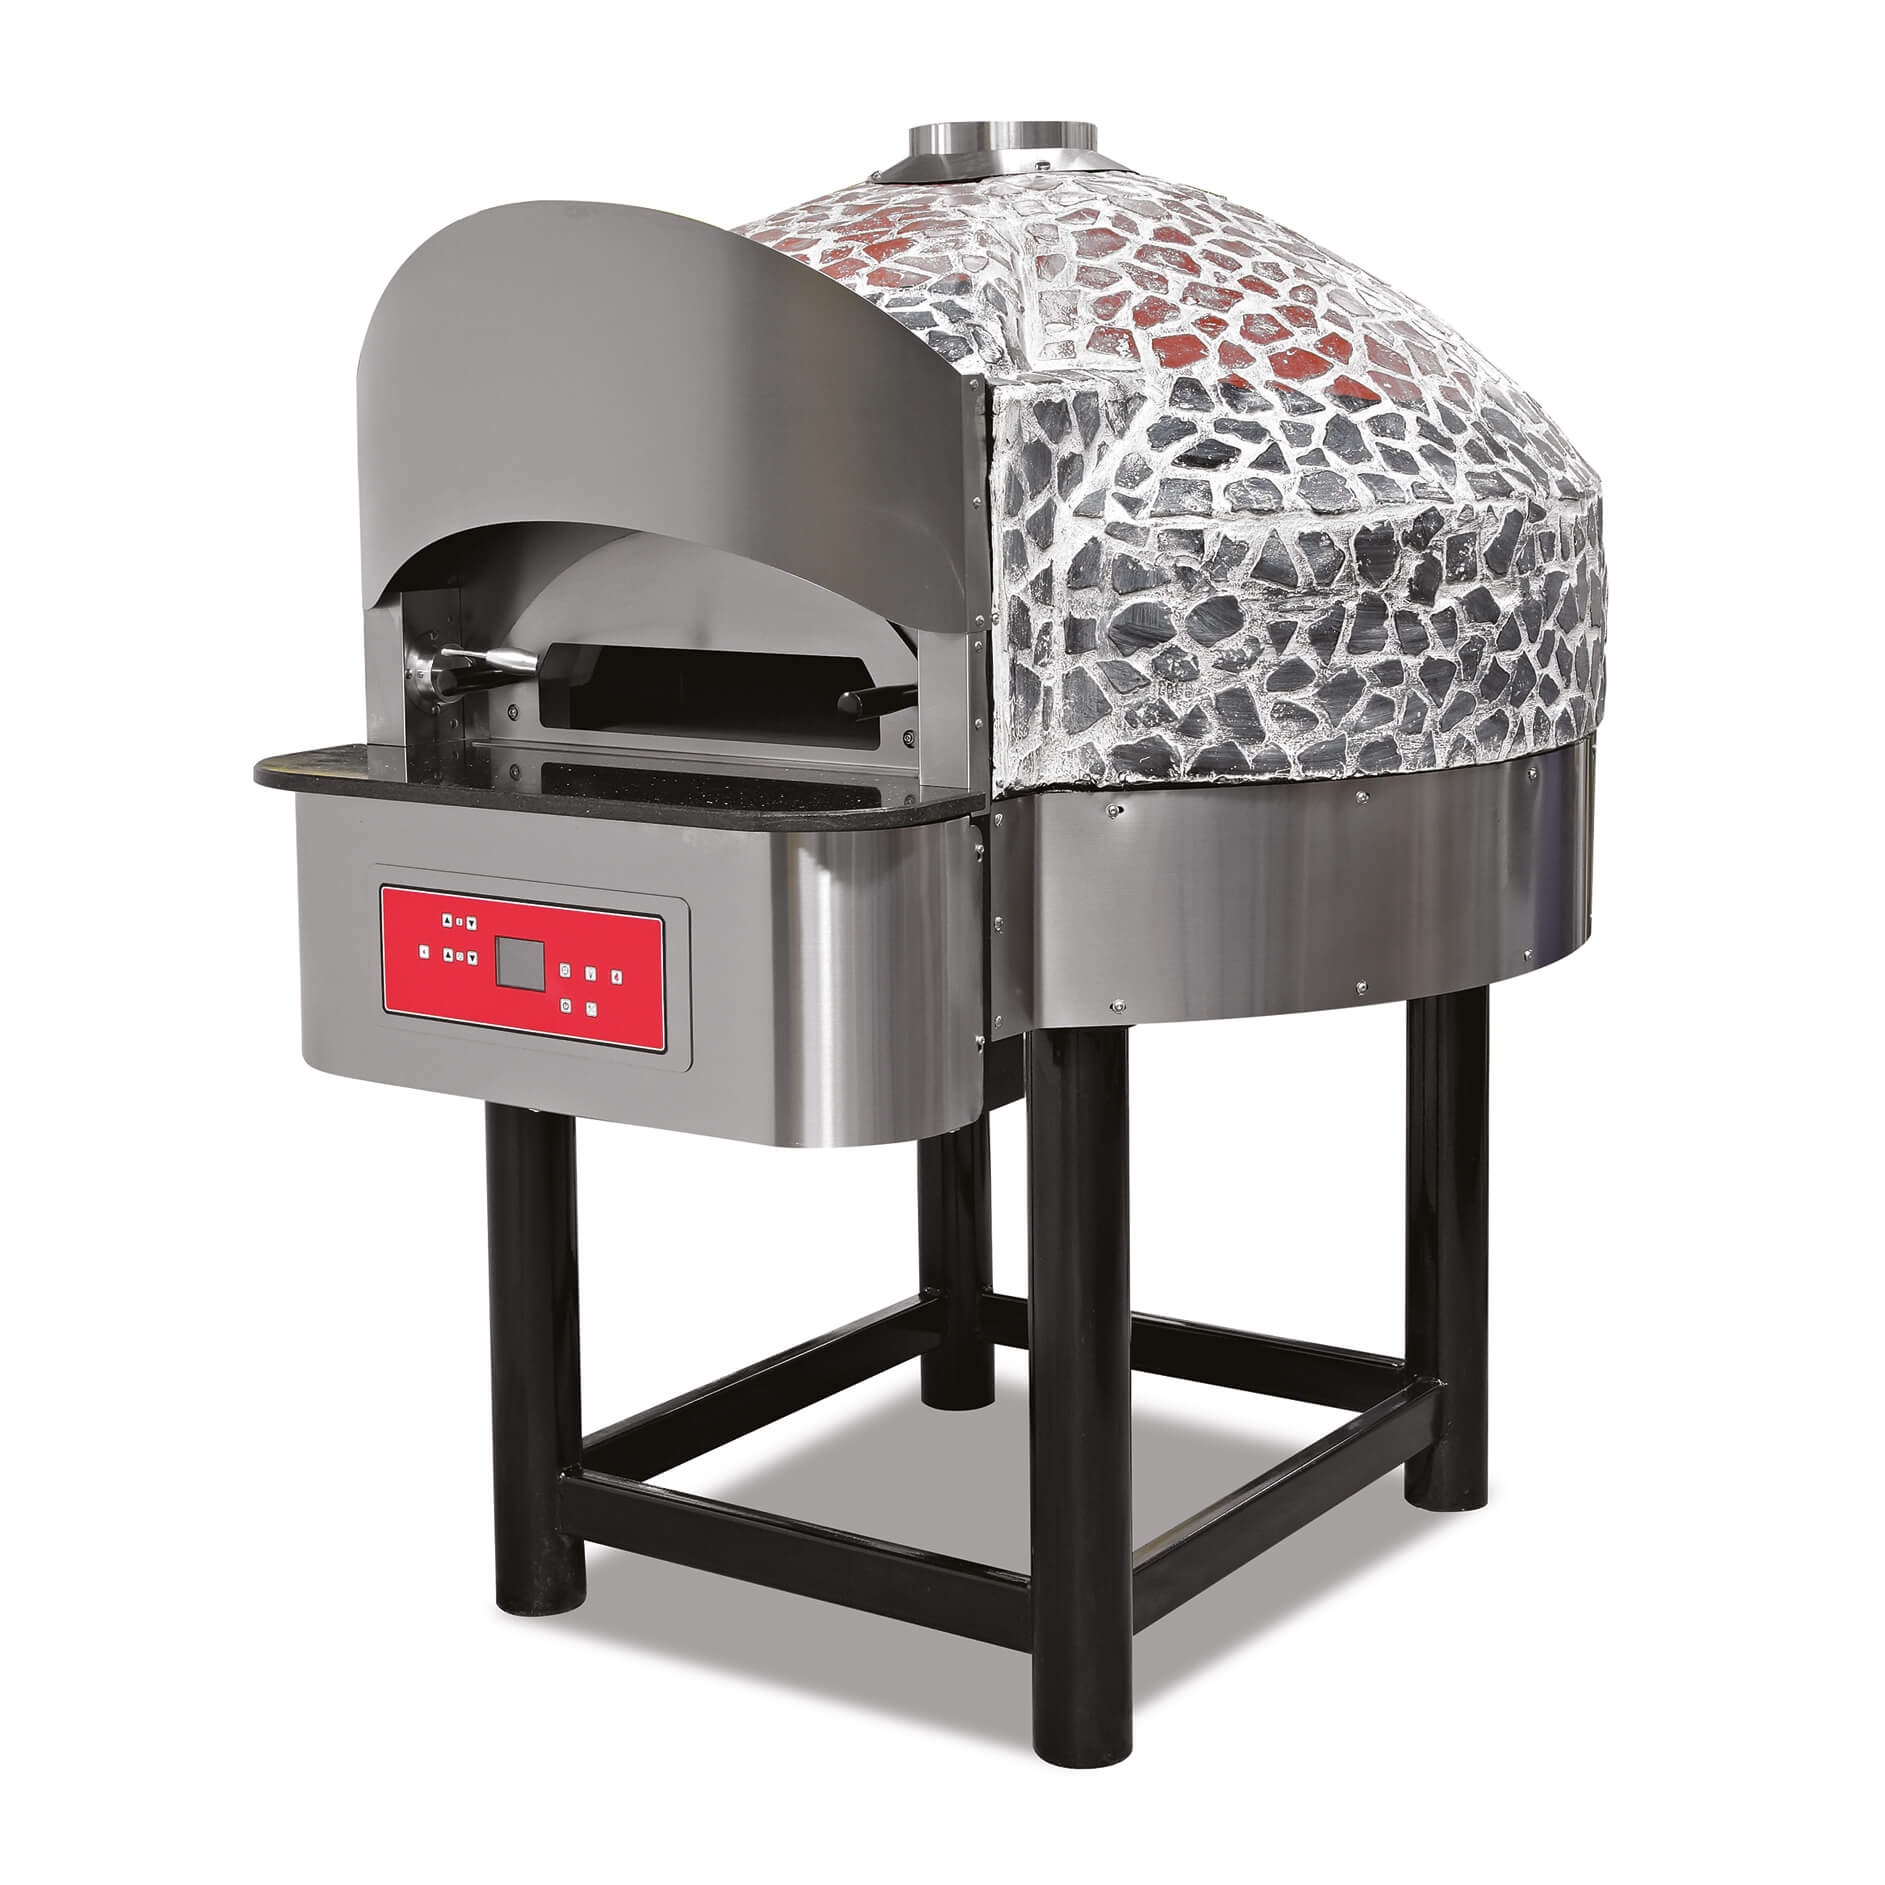 STATIC ELECTRIC PIZZA OVEN